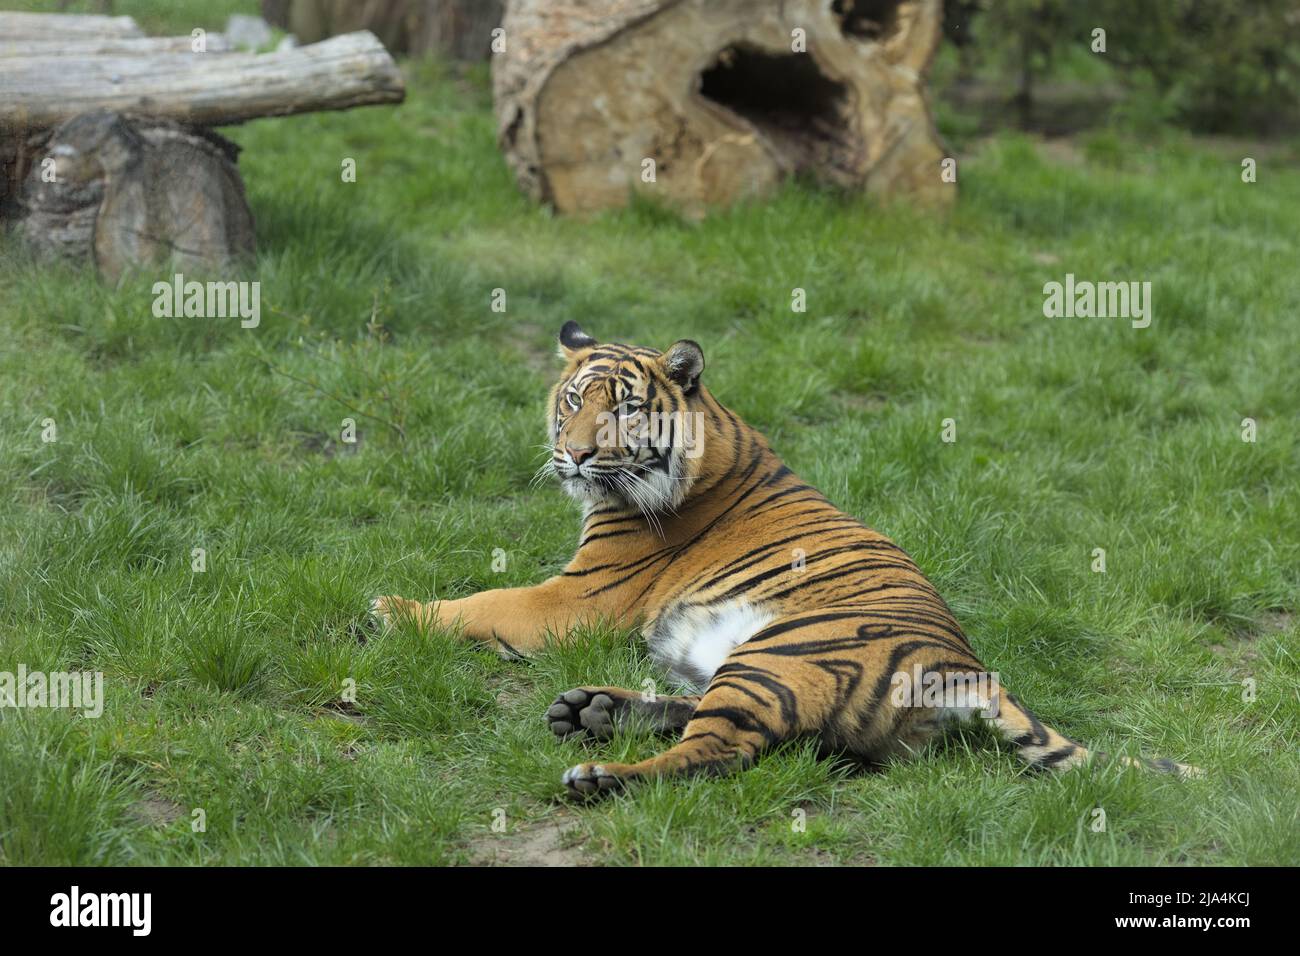 Tiger lying in his enclosure in Wrocław zoo, the oldest Zoological garden in Poland. Stock Photo